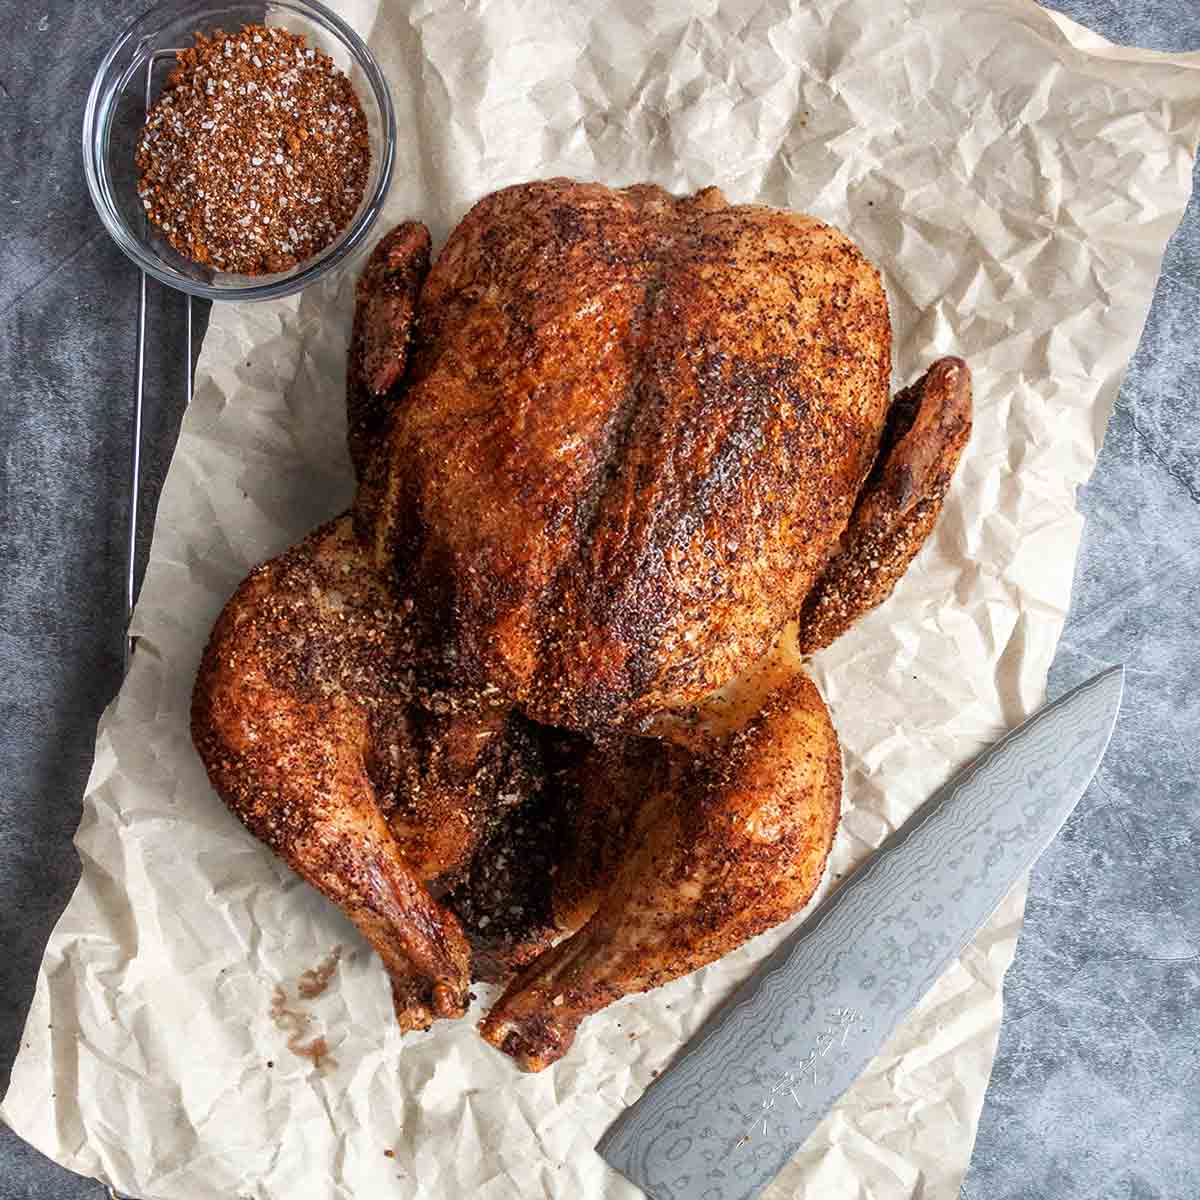 A smoked chicken on a piece of crumpled parchment paper with a knife and a bowl of spice rub on the side.